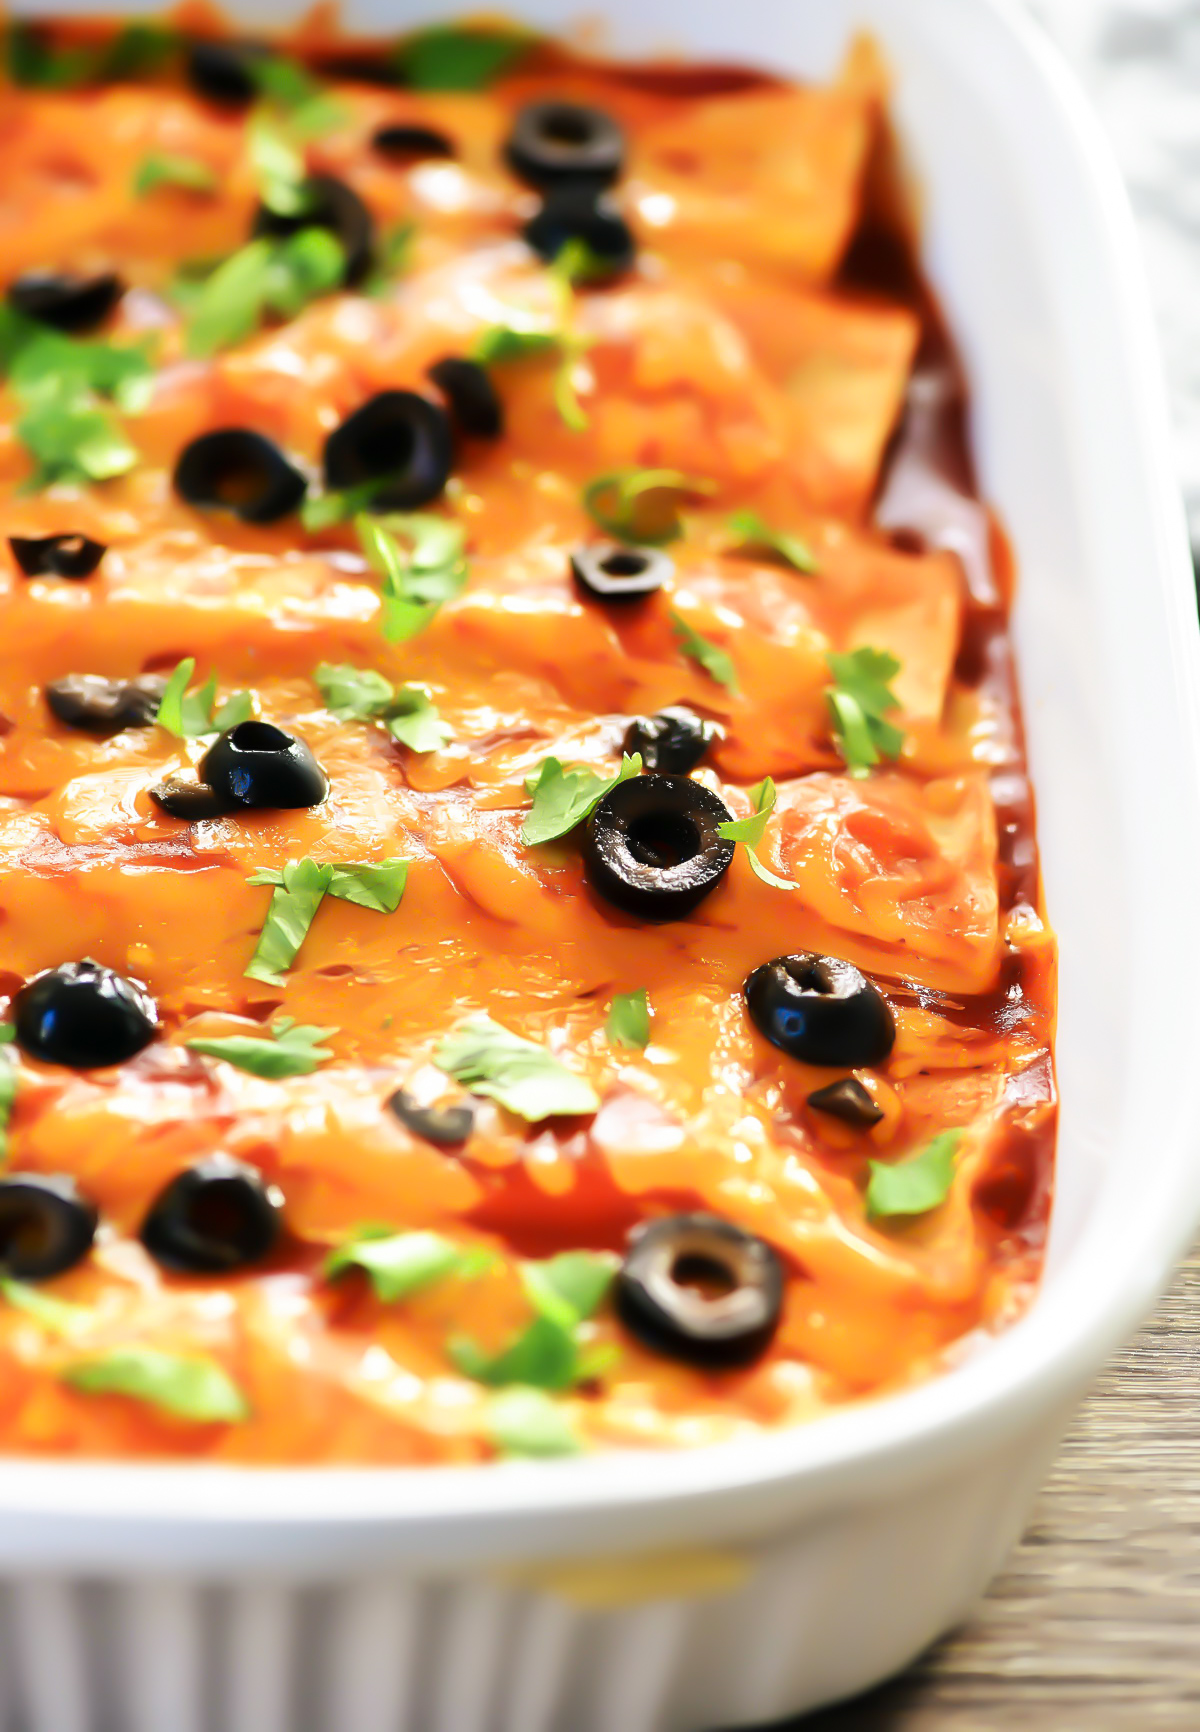 Beef Enchiladas that are a bit lighter in calories.